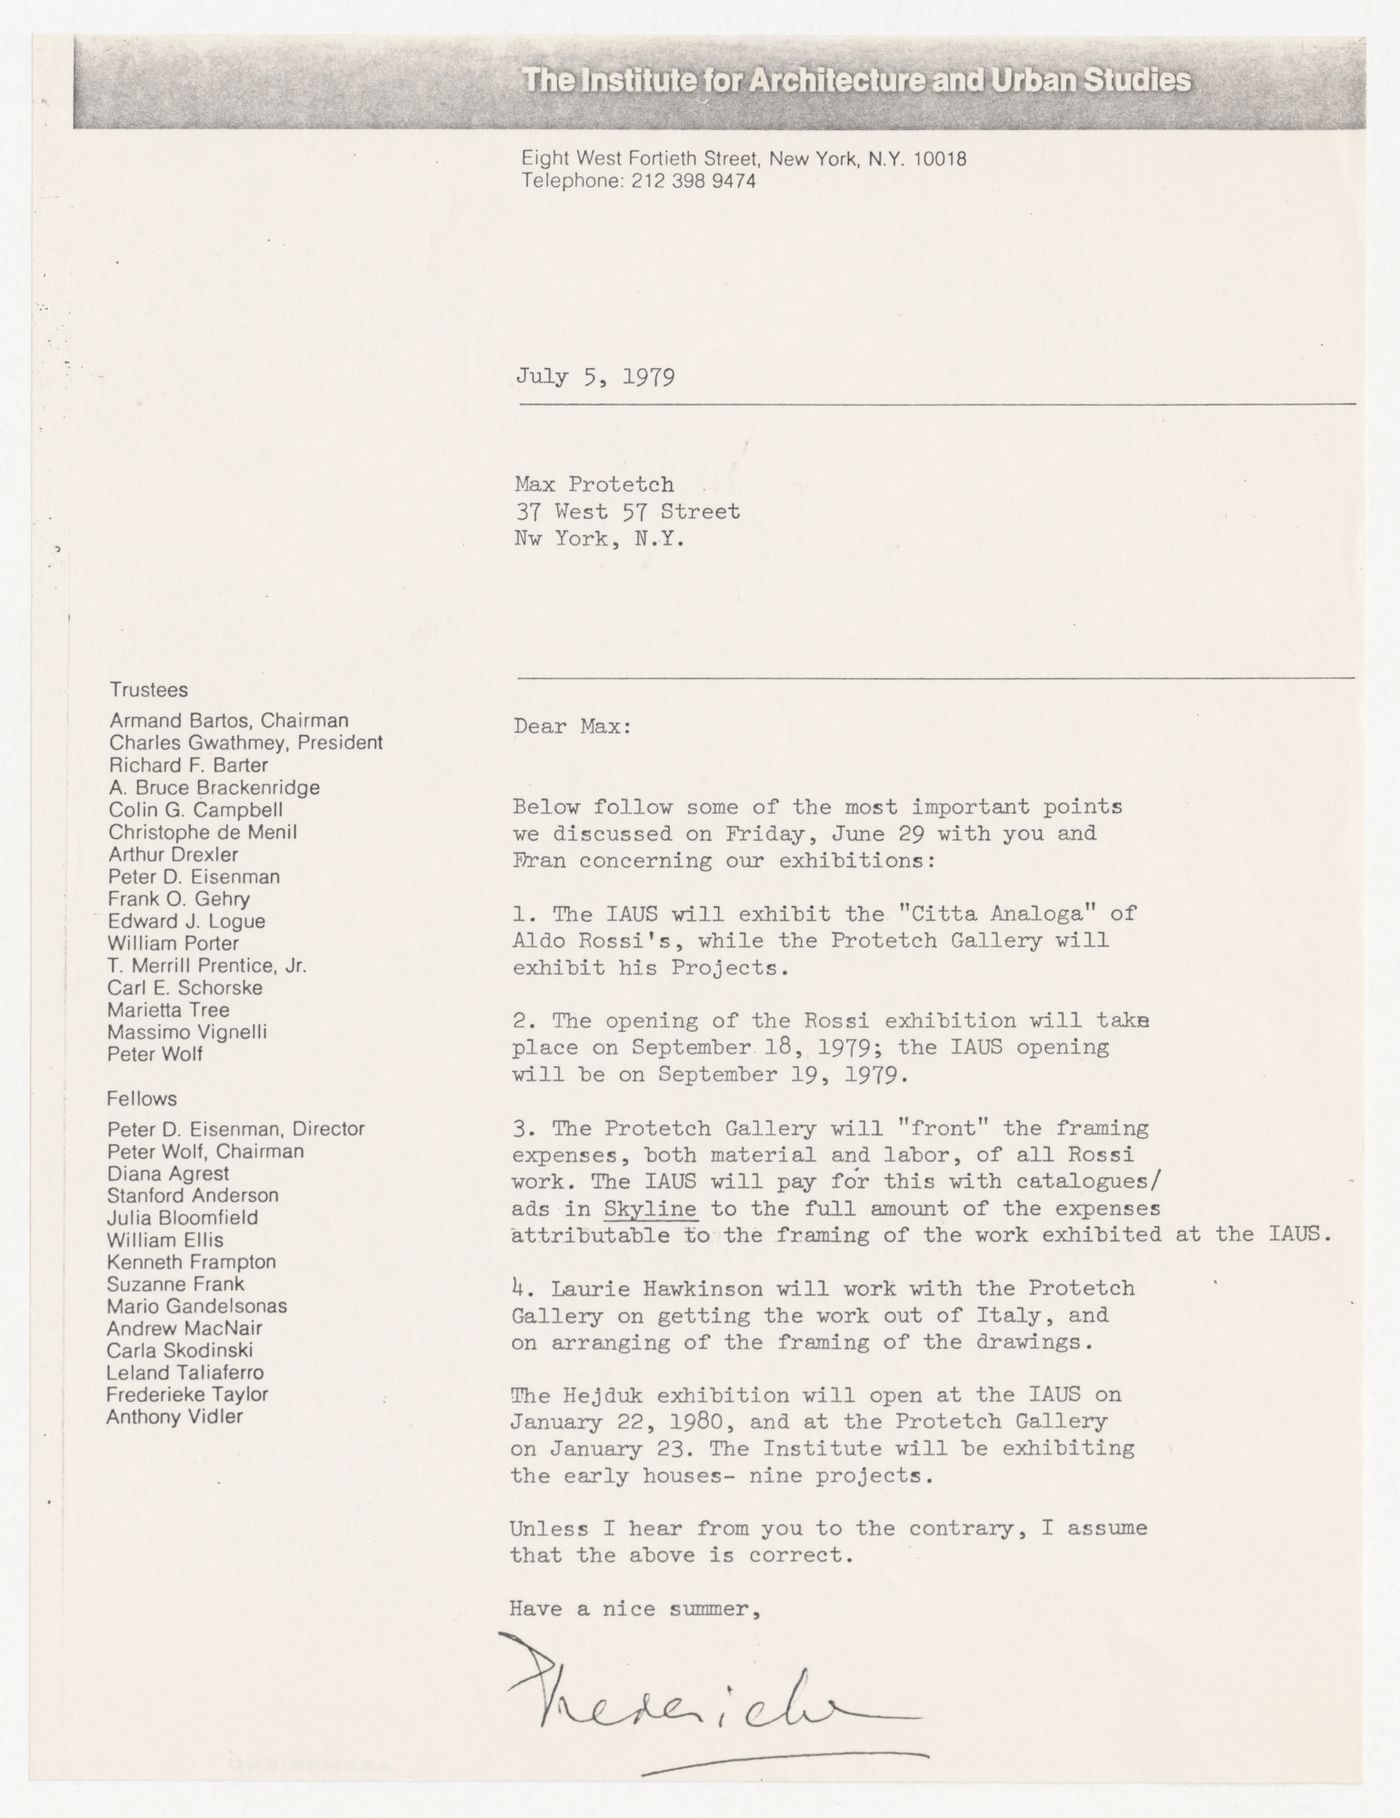 Letter from Frederieke Taylor to Max Protetch about exhibition of Aldo Rossi's work